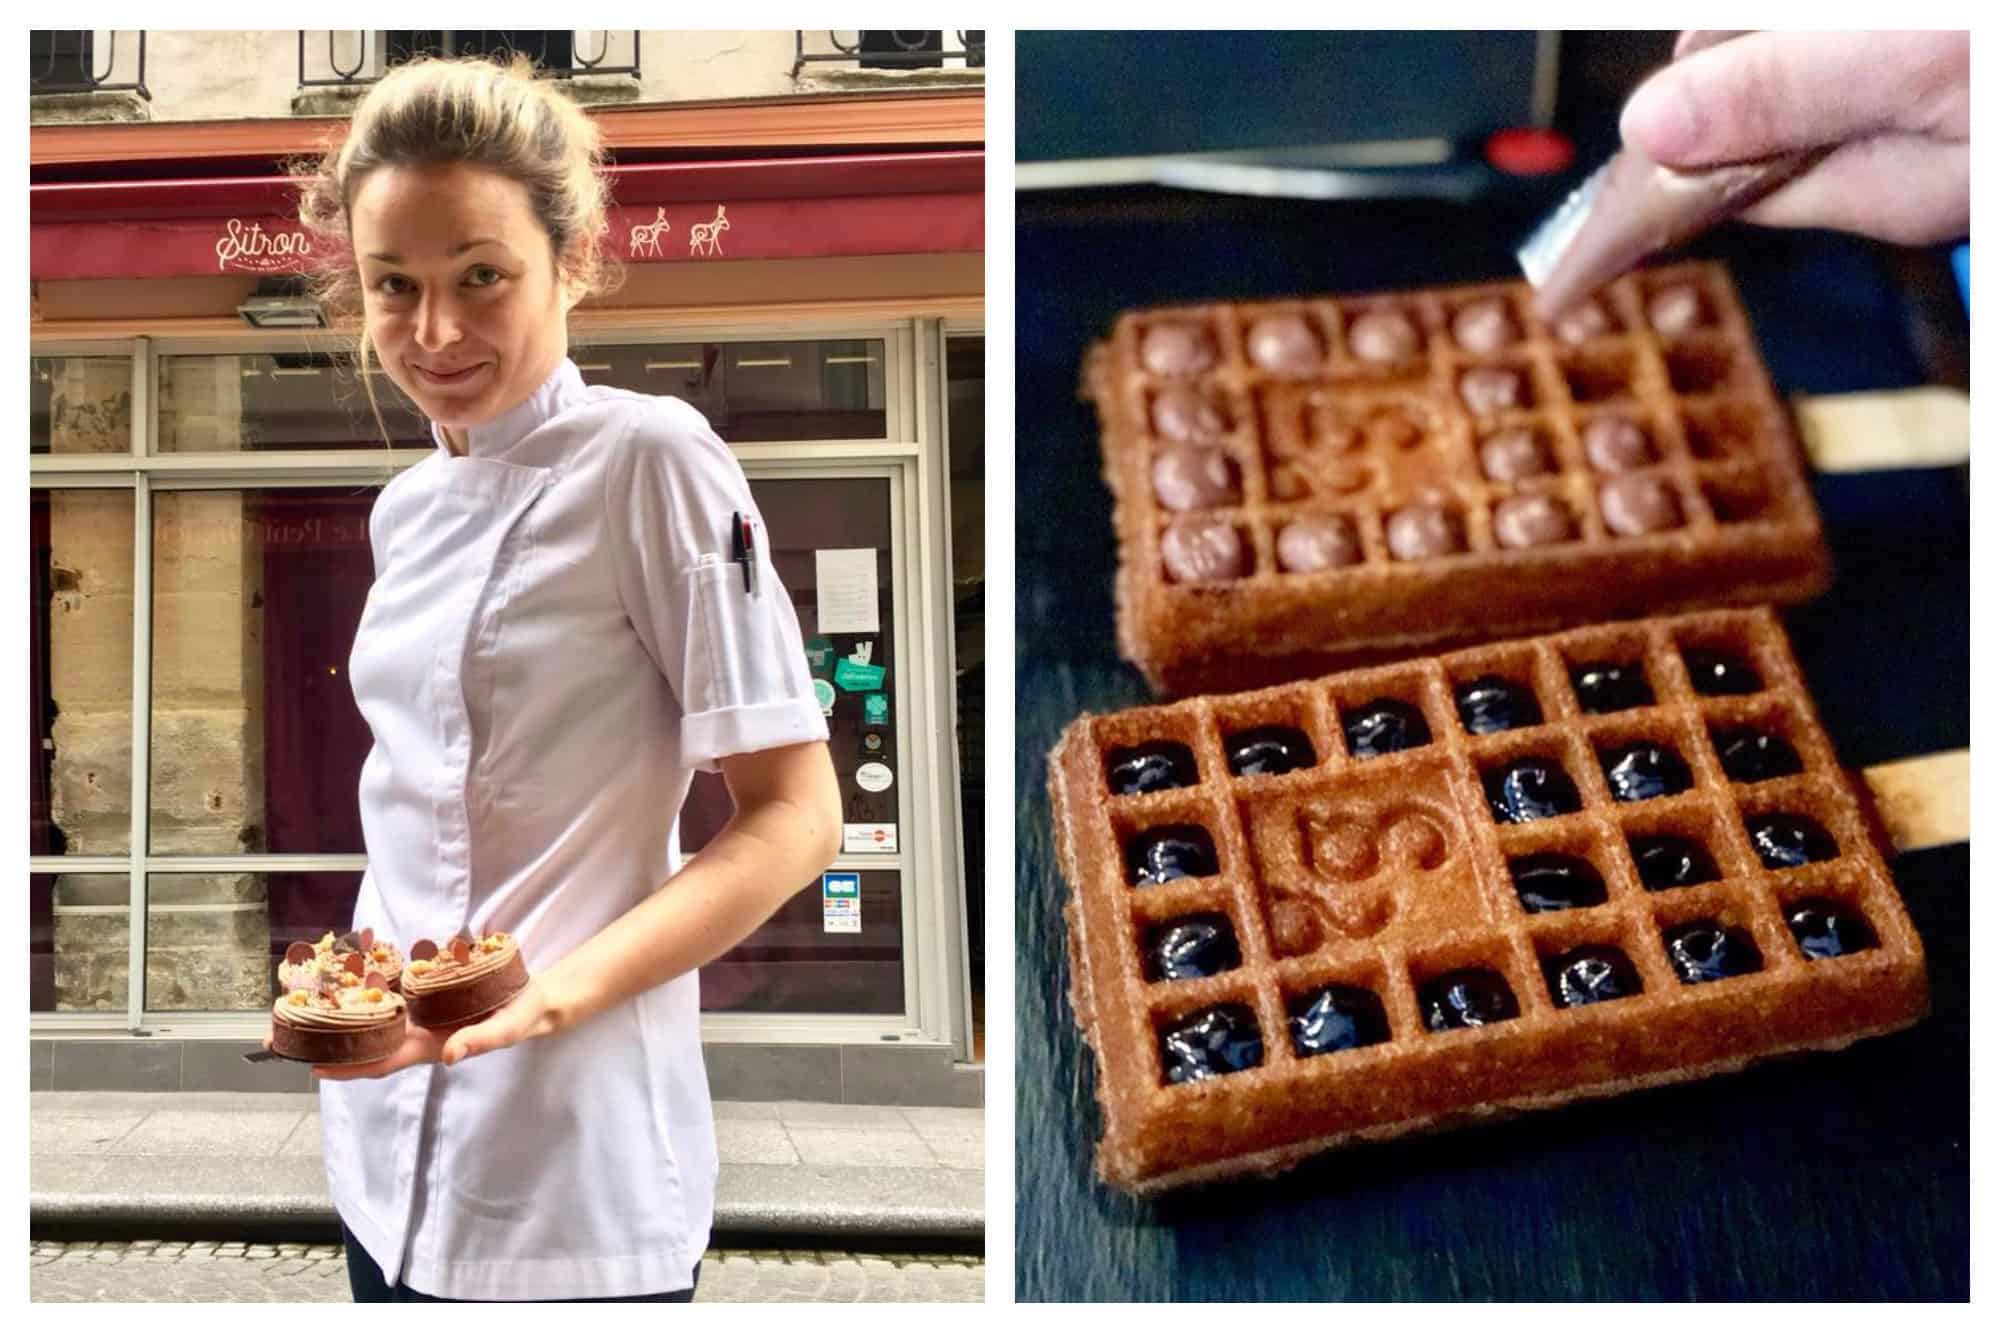 One of the bakers at Sitron holding three tars out on a Paris street (left). Gluten-free crispy chocolate-sauce waffles at Paris' Yummy and Guiltfree (right).